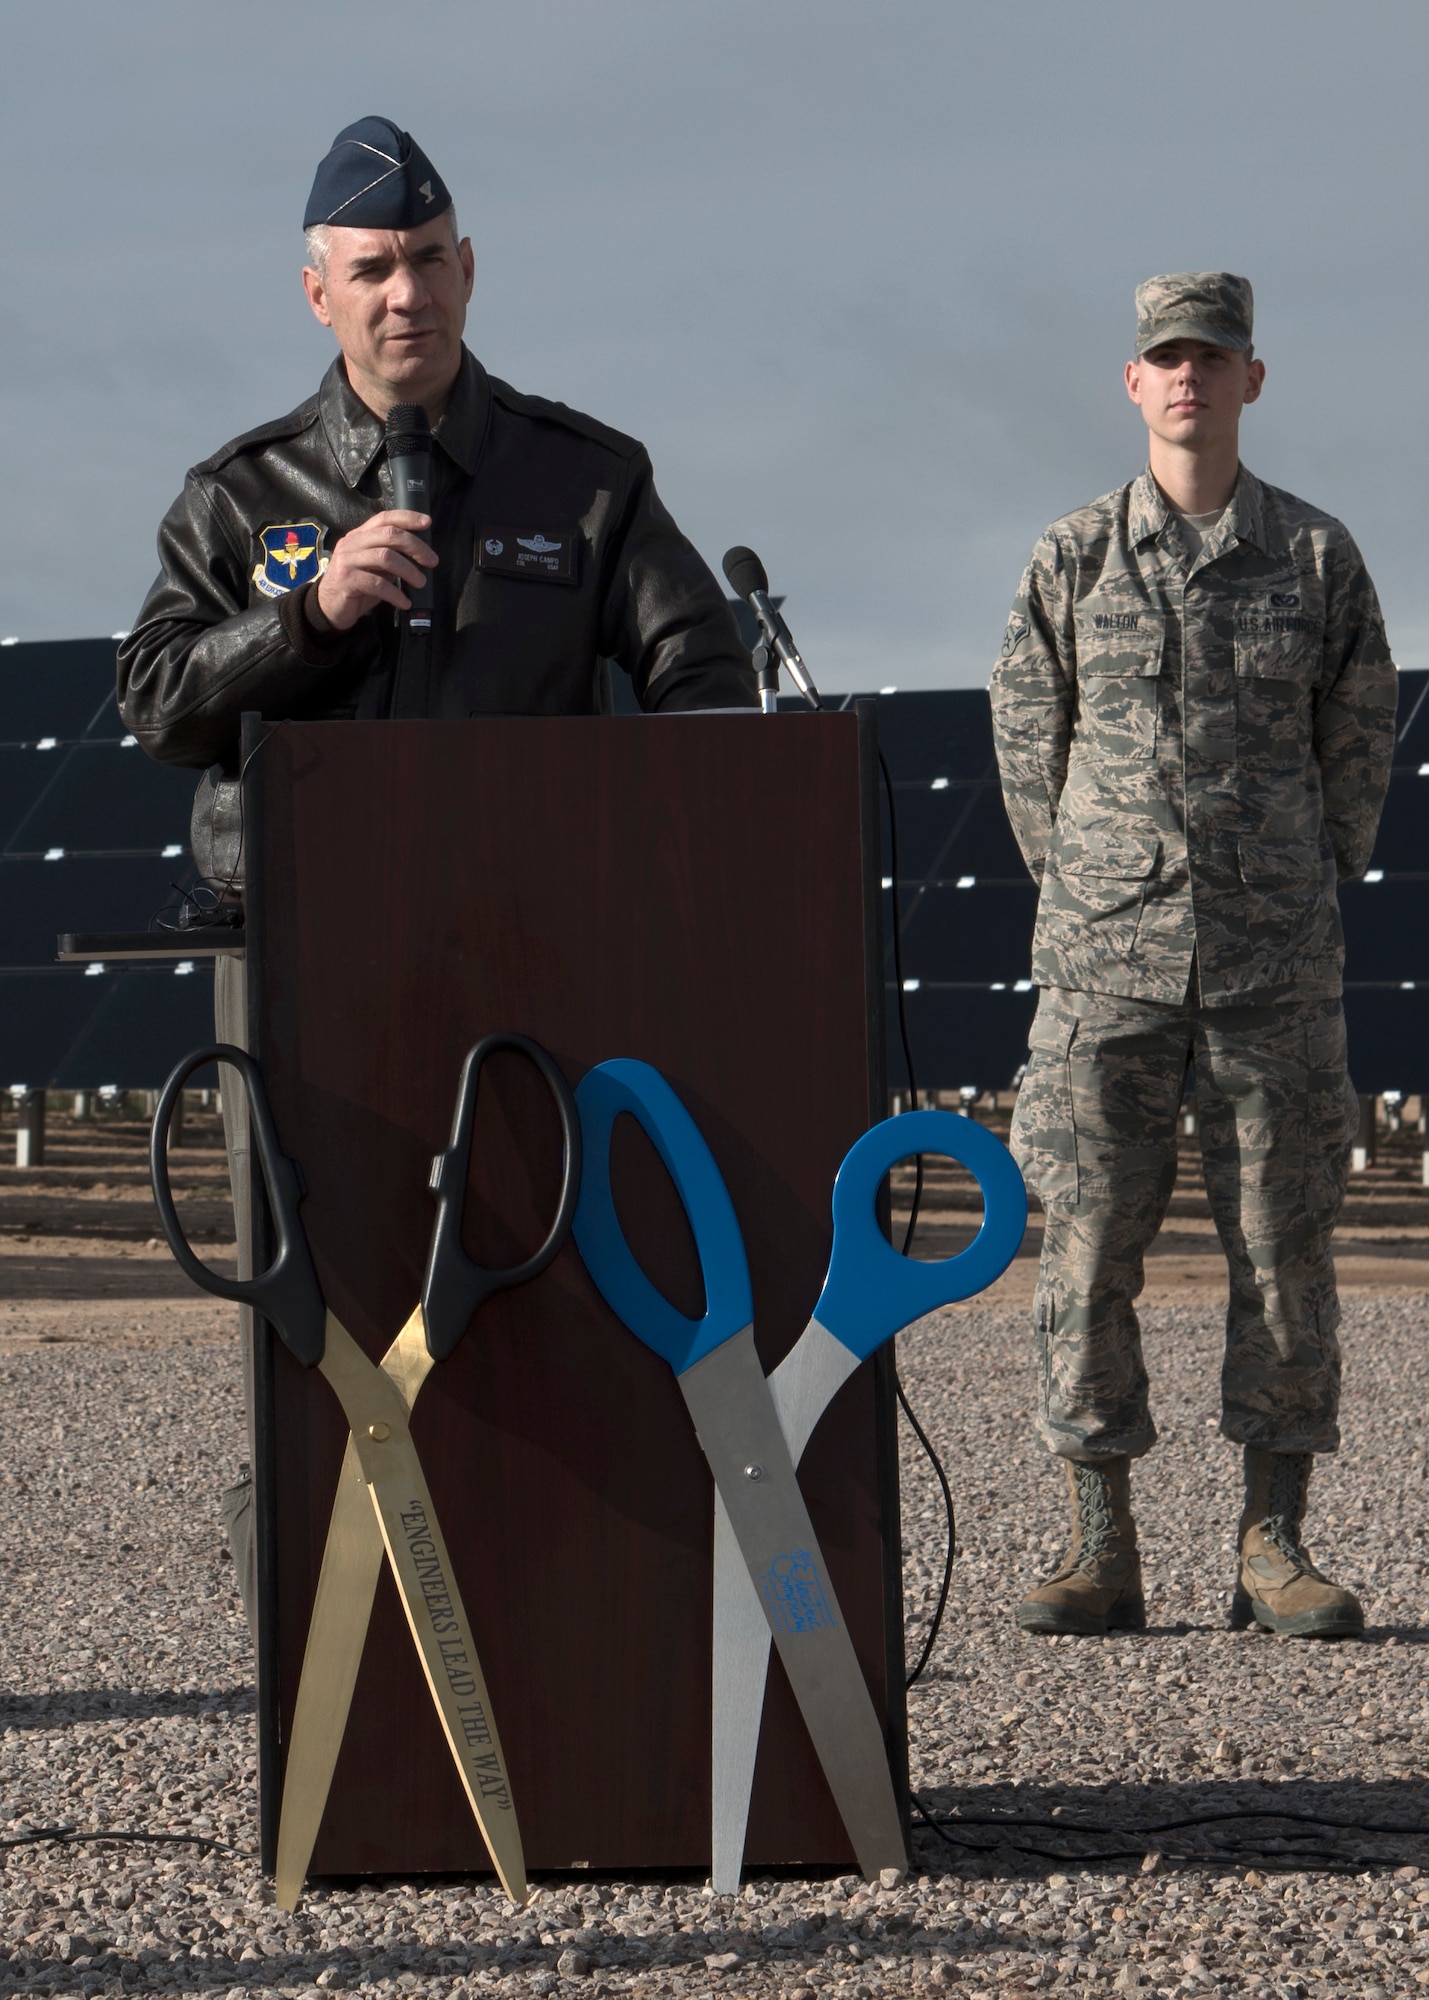 Col. Joseph L. Campo, 49th Wing commander, speaks at the solar array opening ceremony and ribbon cutting Oct. 19 on Holloman Air Force Base, N.M. The solar array increases Holloman's mission resiliency over the next 30 years to meet national directives. (U.S. Air Force photo by Airman 1st Class Kindra Stewart)